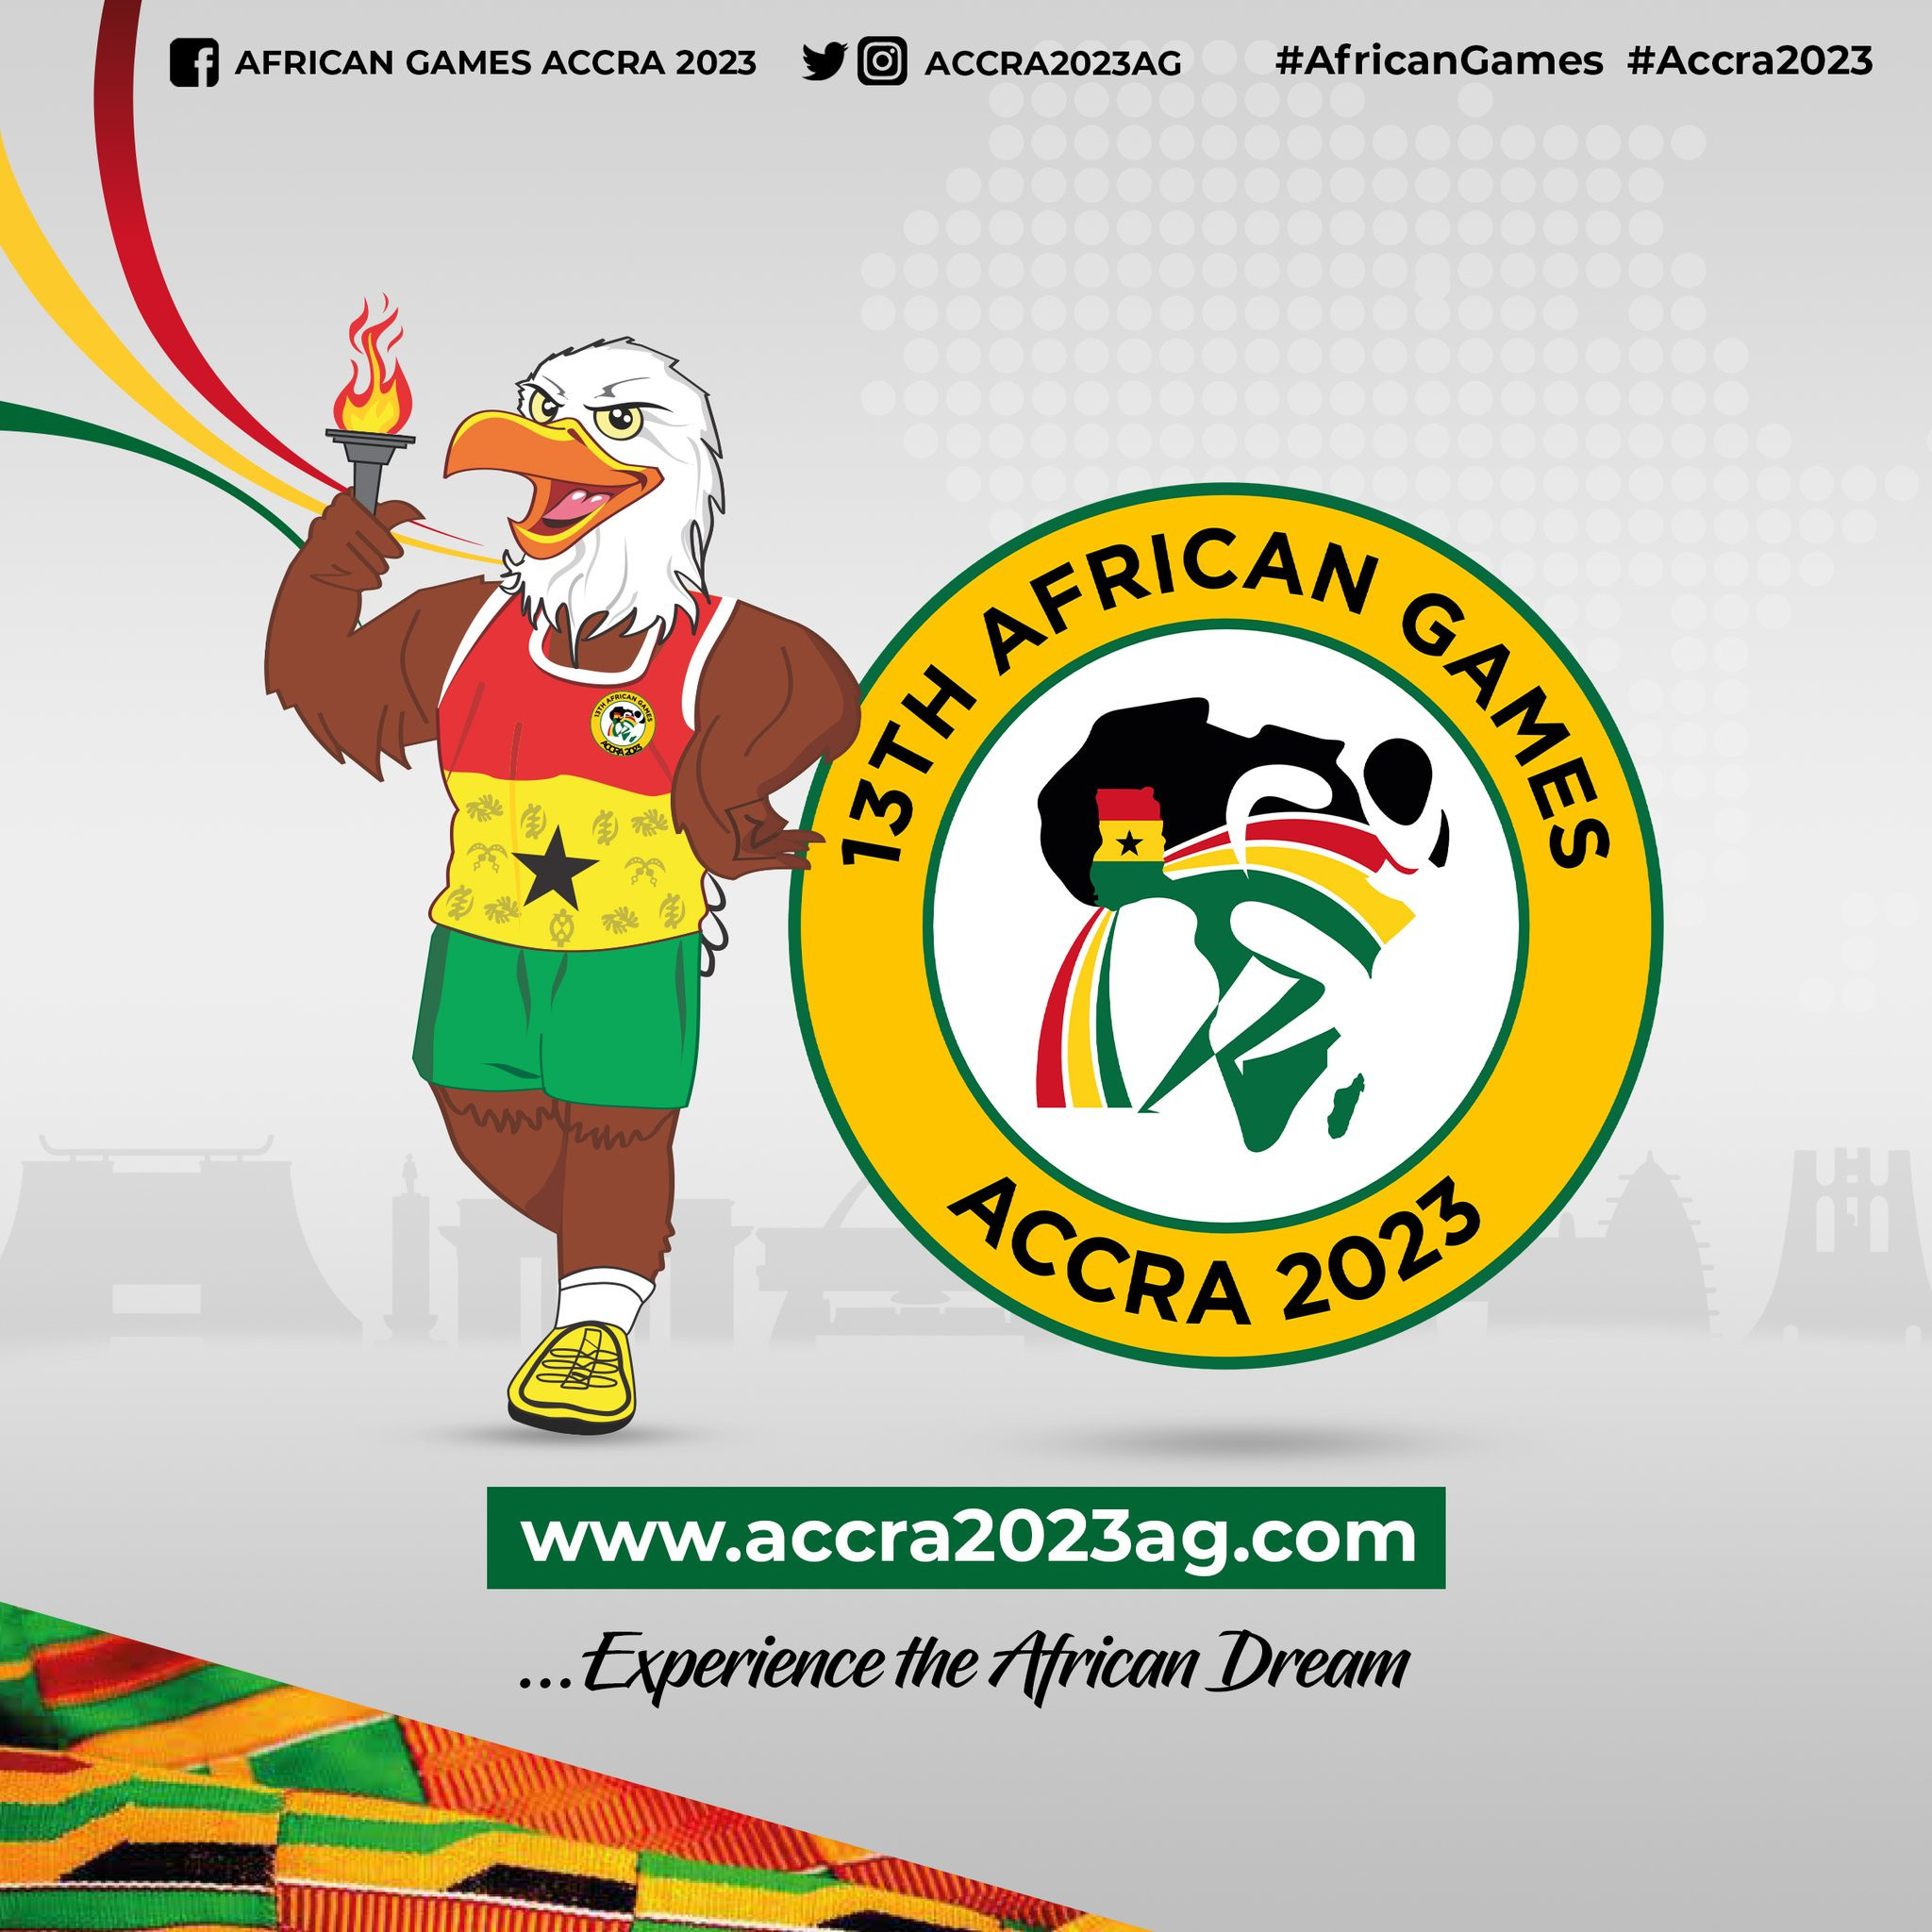 African Games to take place next March under same Accra 2023 branding after new dates unveiled